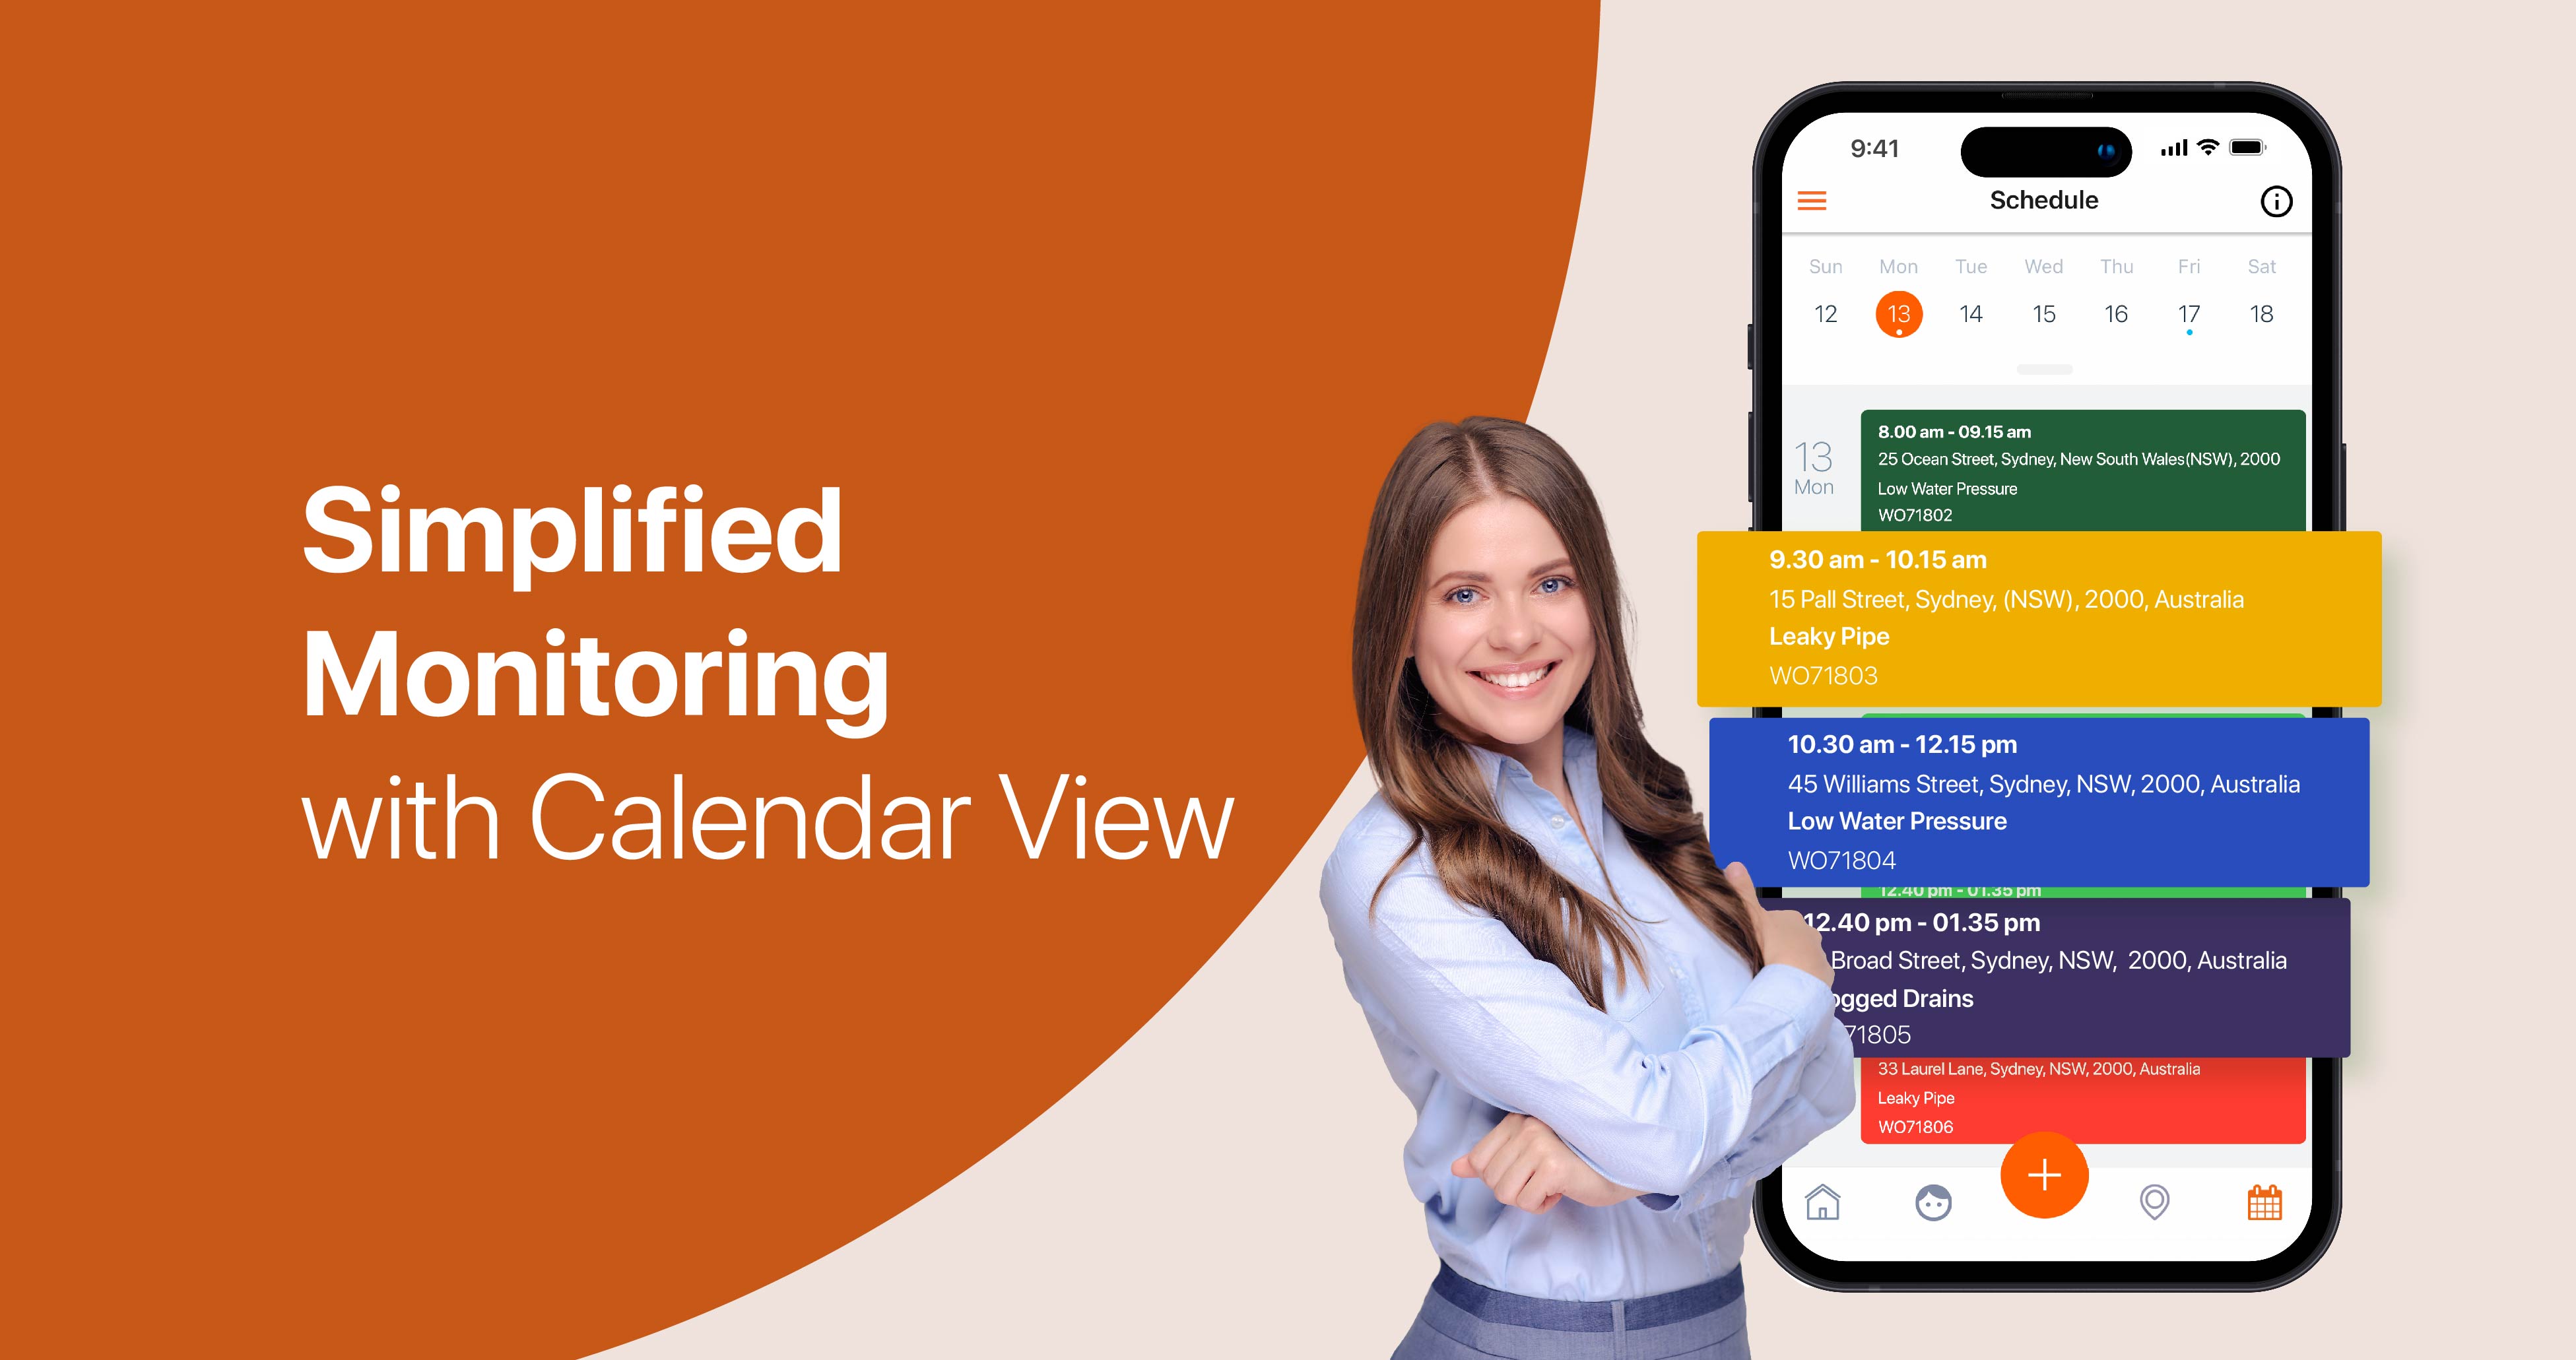 Take complete control over your property maintenance data, and use the calendar view with a refined visual structure to easily navigate all your scheduled day-to-day work. Easily assign work orders to your employees and stay organised.